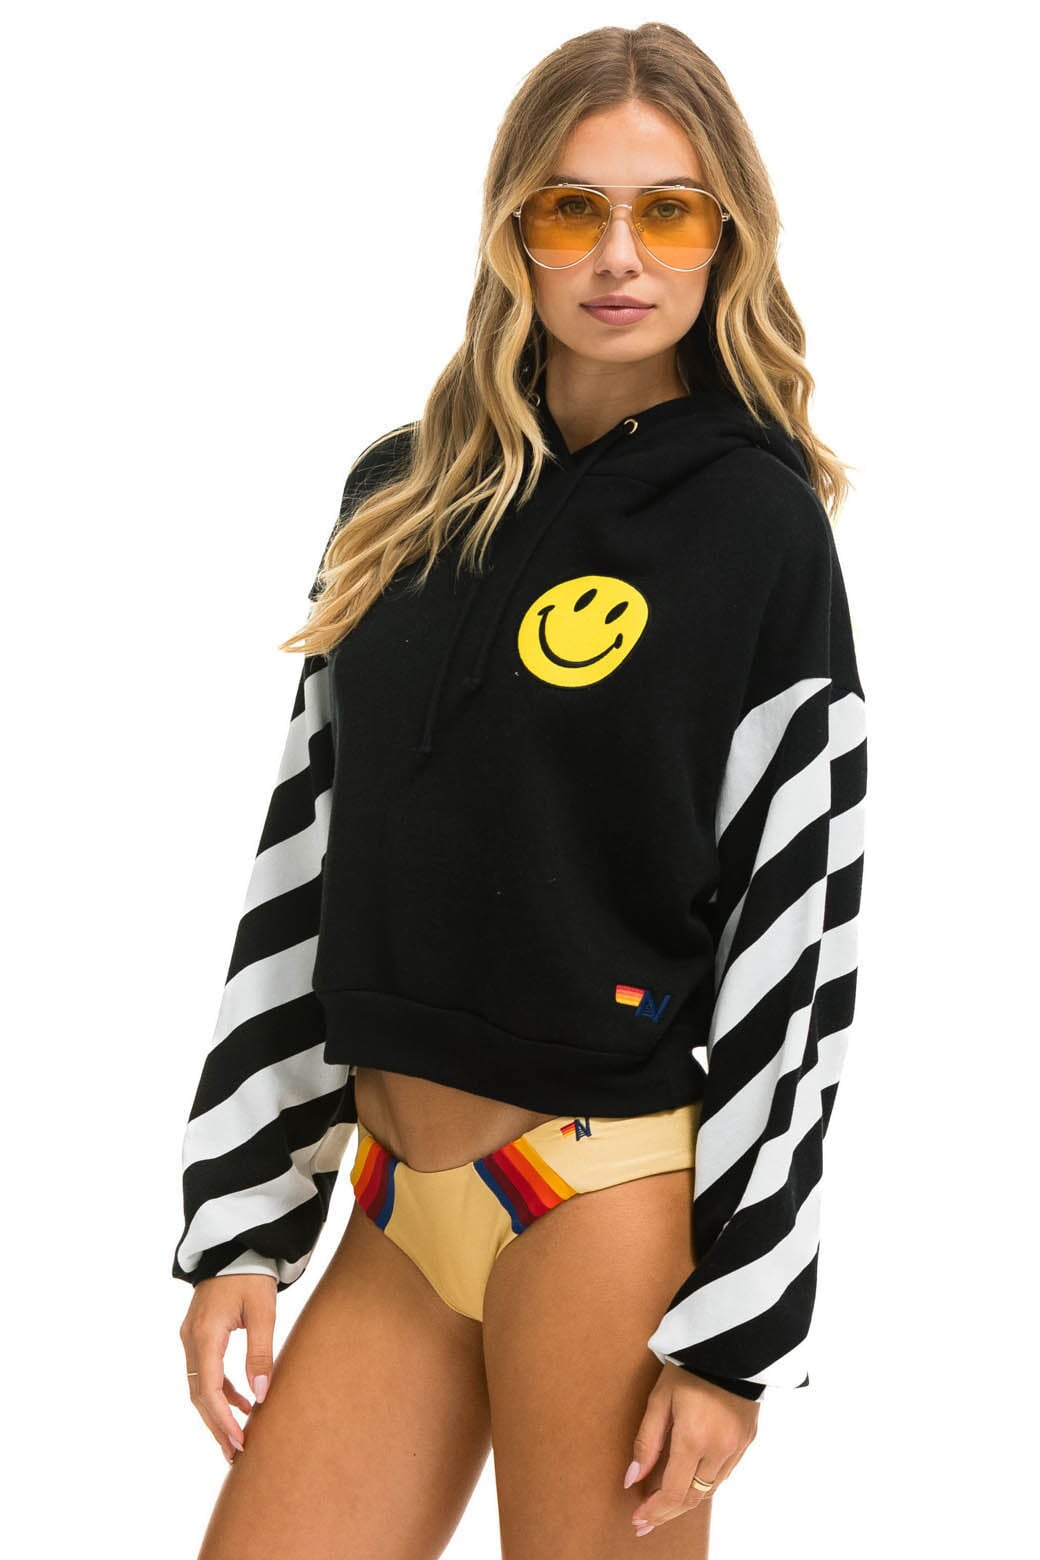 CAUTION STRIPE SLEEVE SMILEY 2 EMBROIDERY RELAXED CROPPED PULLOVER